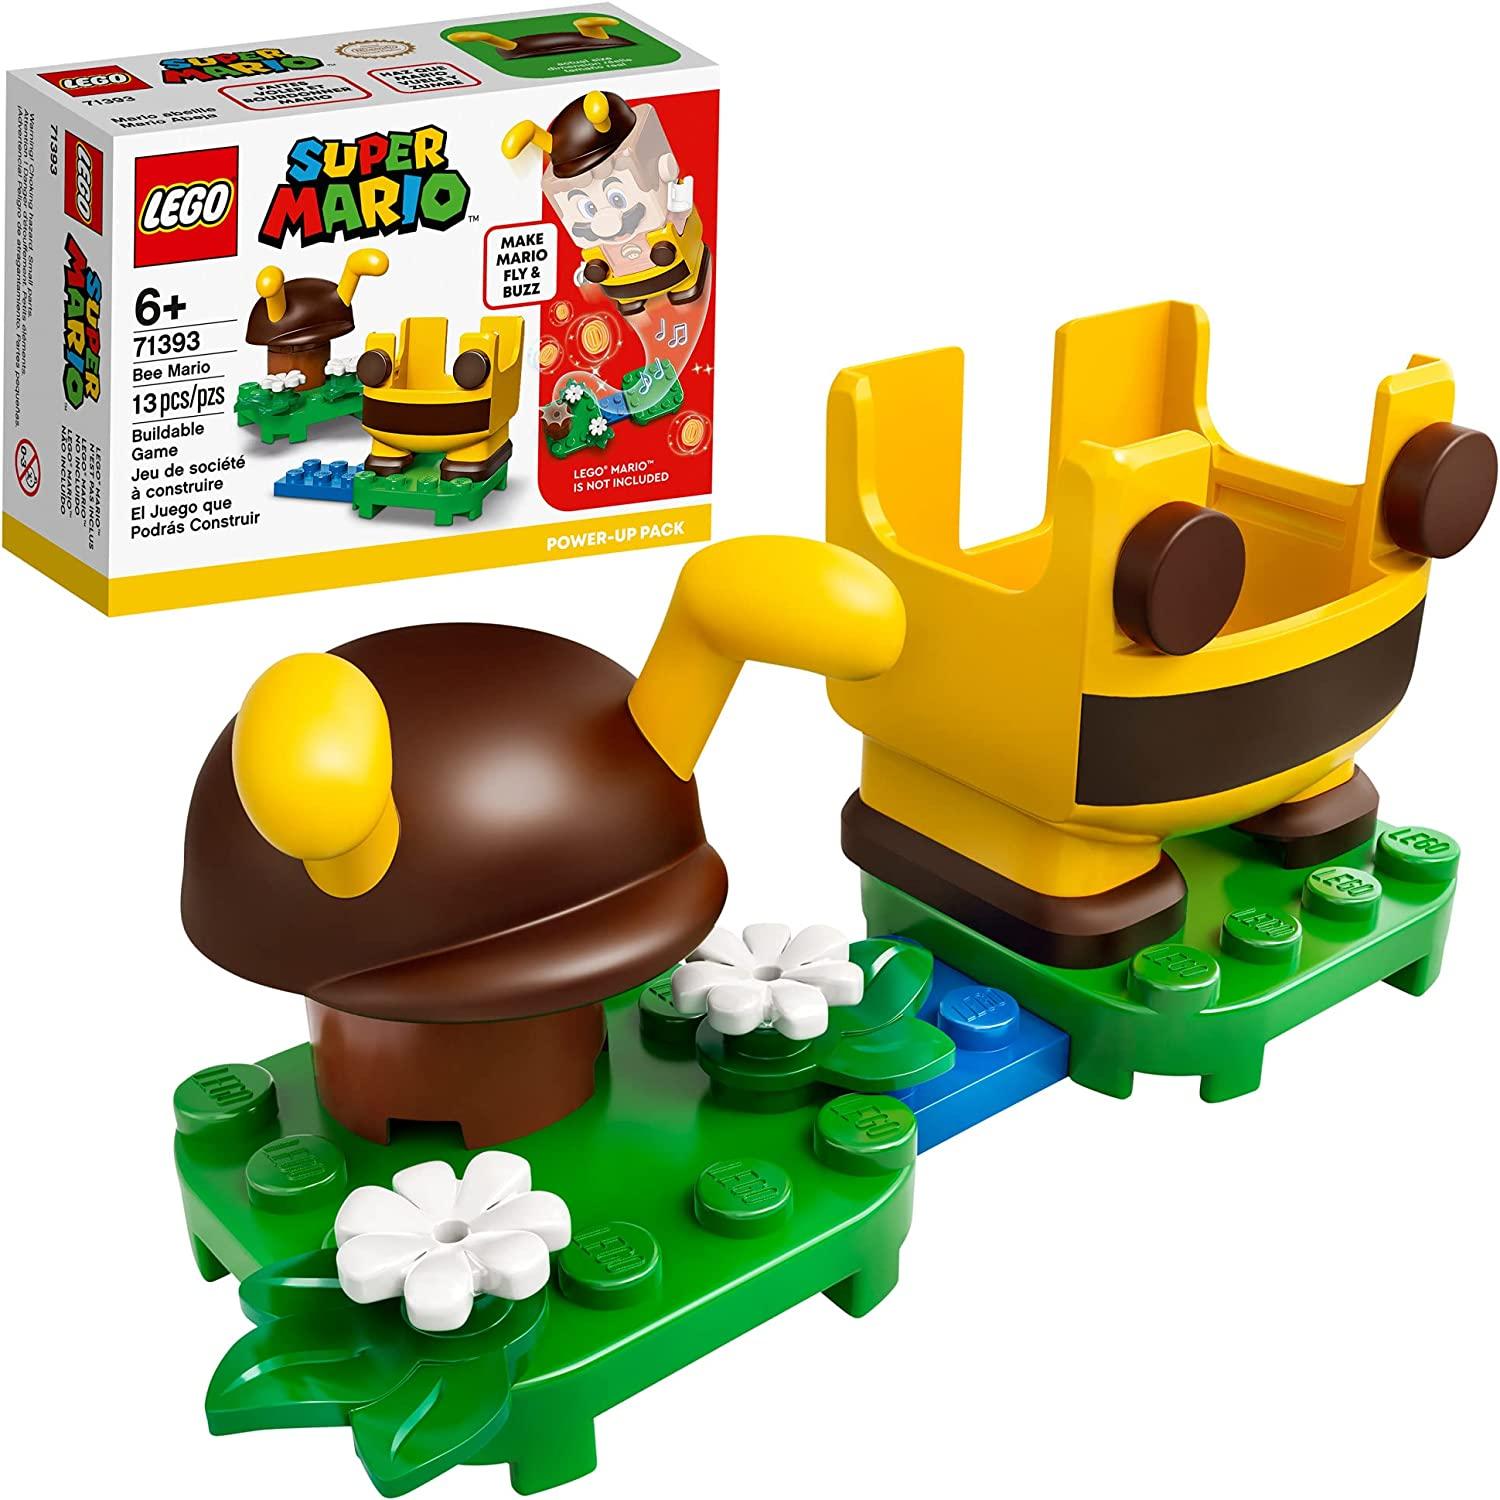 LEGO Super Mario Bee Mario Power-Up Pack 71393 for $4.99